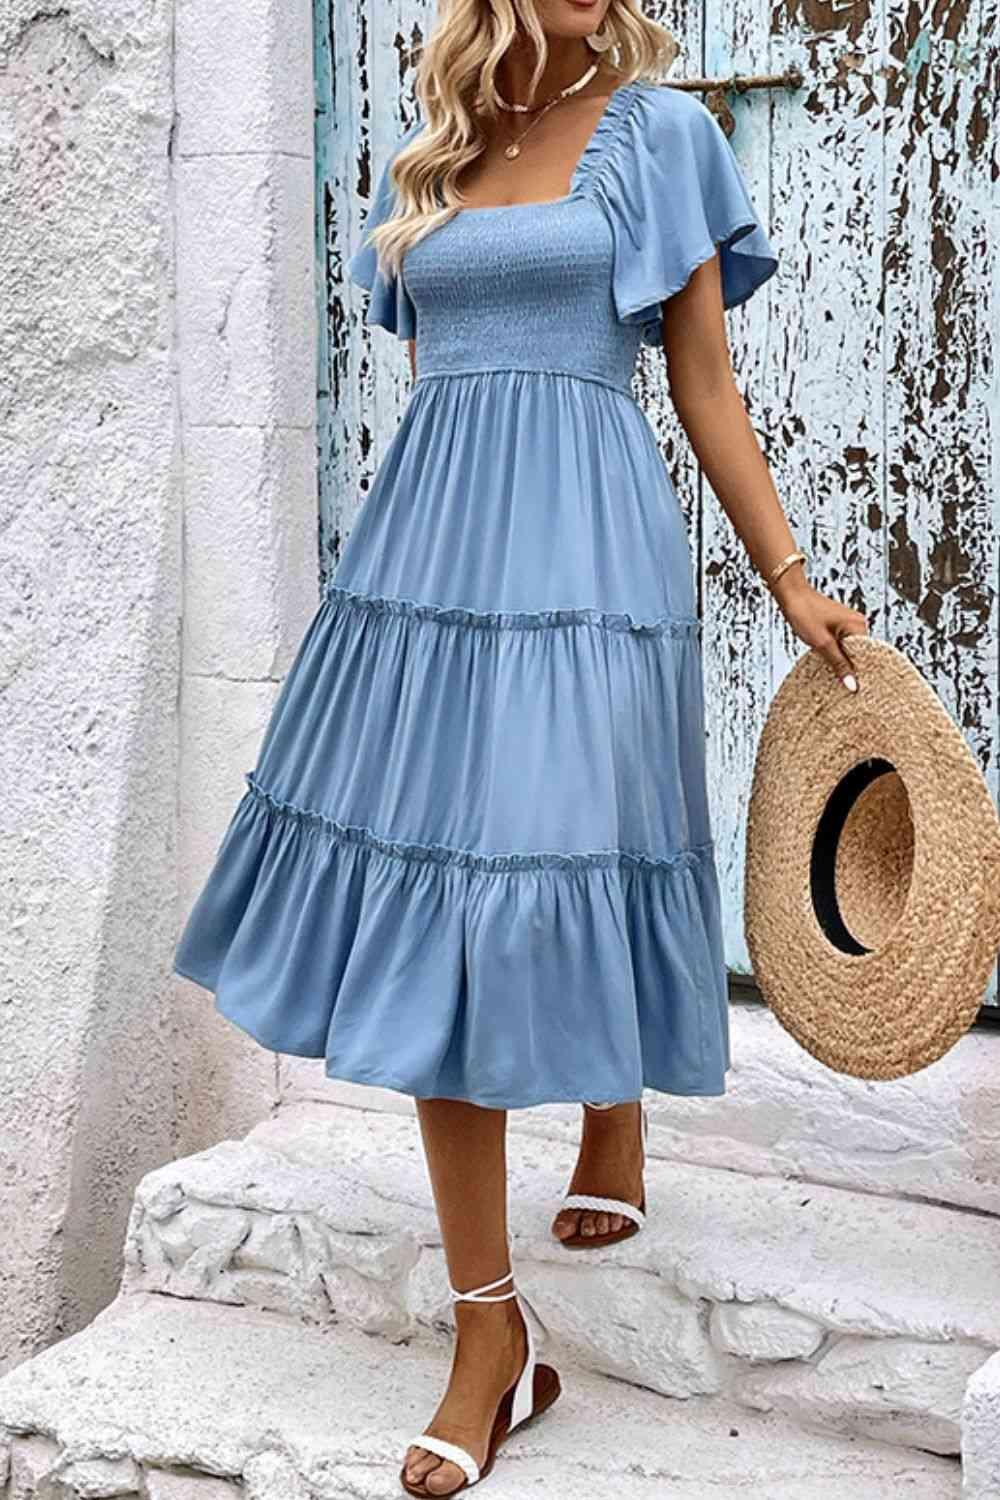 a woman wearing a blue dress and straw hat